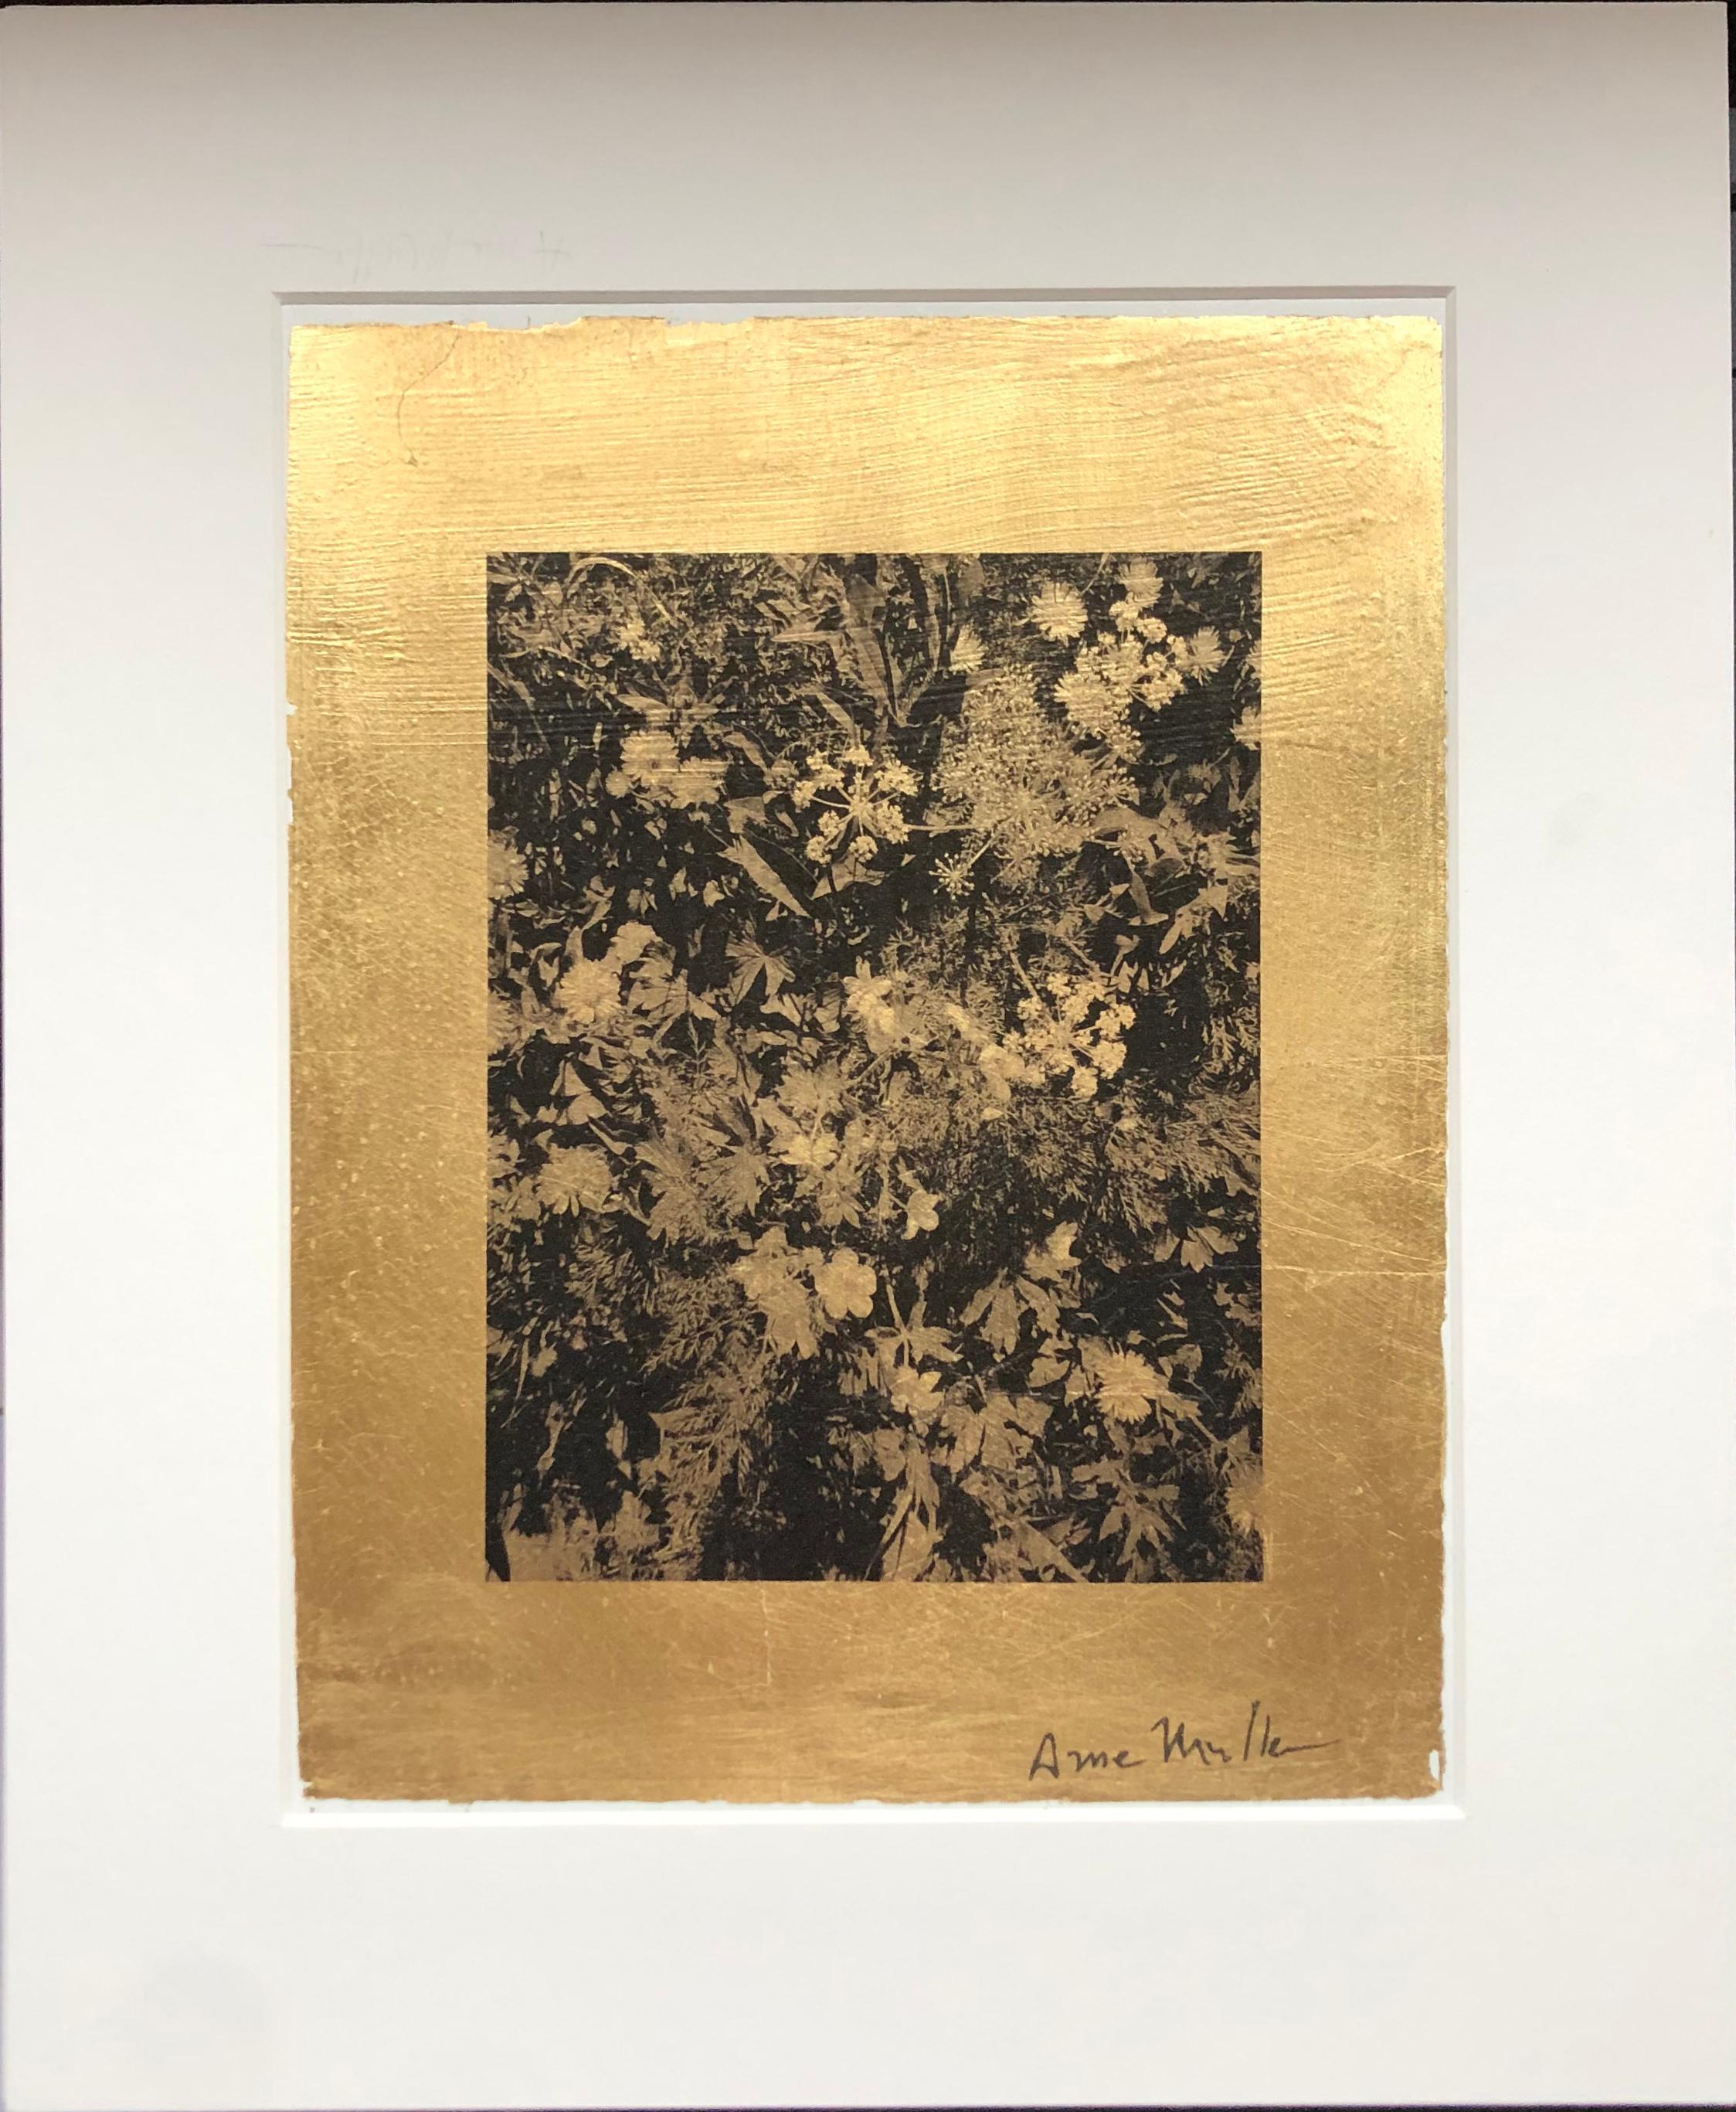 A vertical photographic print on gold leaf of wildflowers by Anne Muller. Muller - a self-taught artist - practices photography, painting, and textile art, and imbues her photographic work with a creative sense of color and texture. In this work,